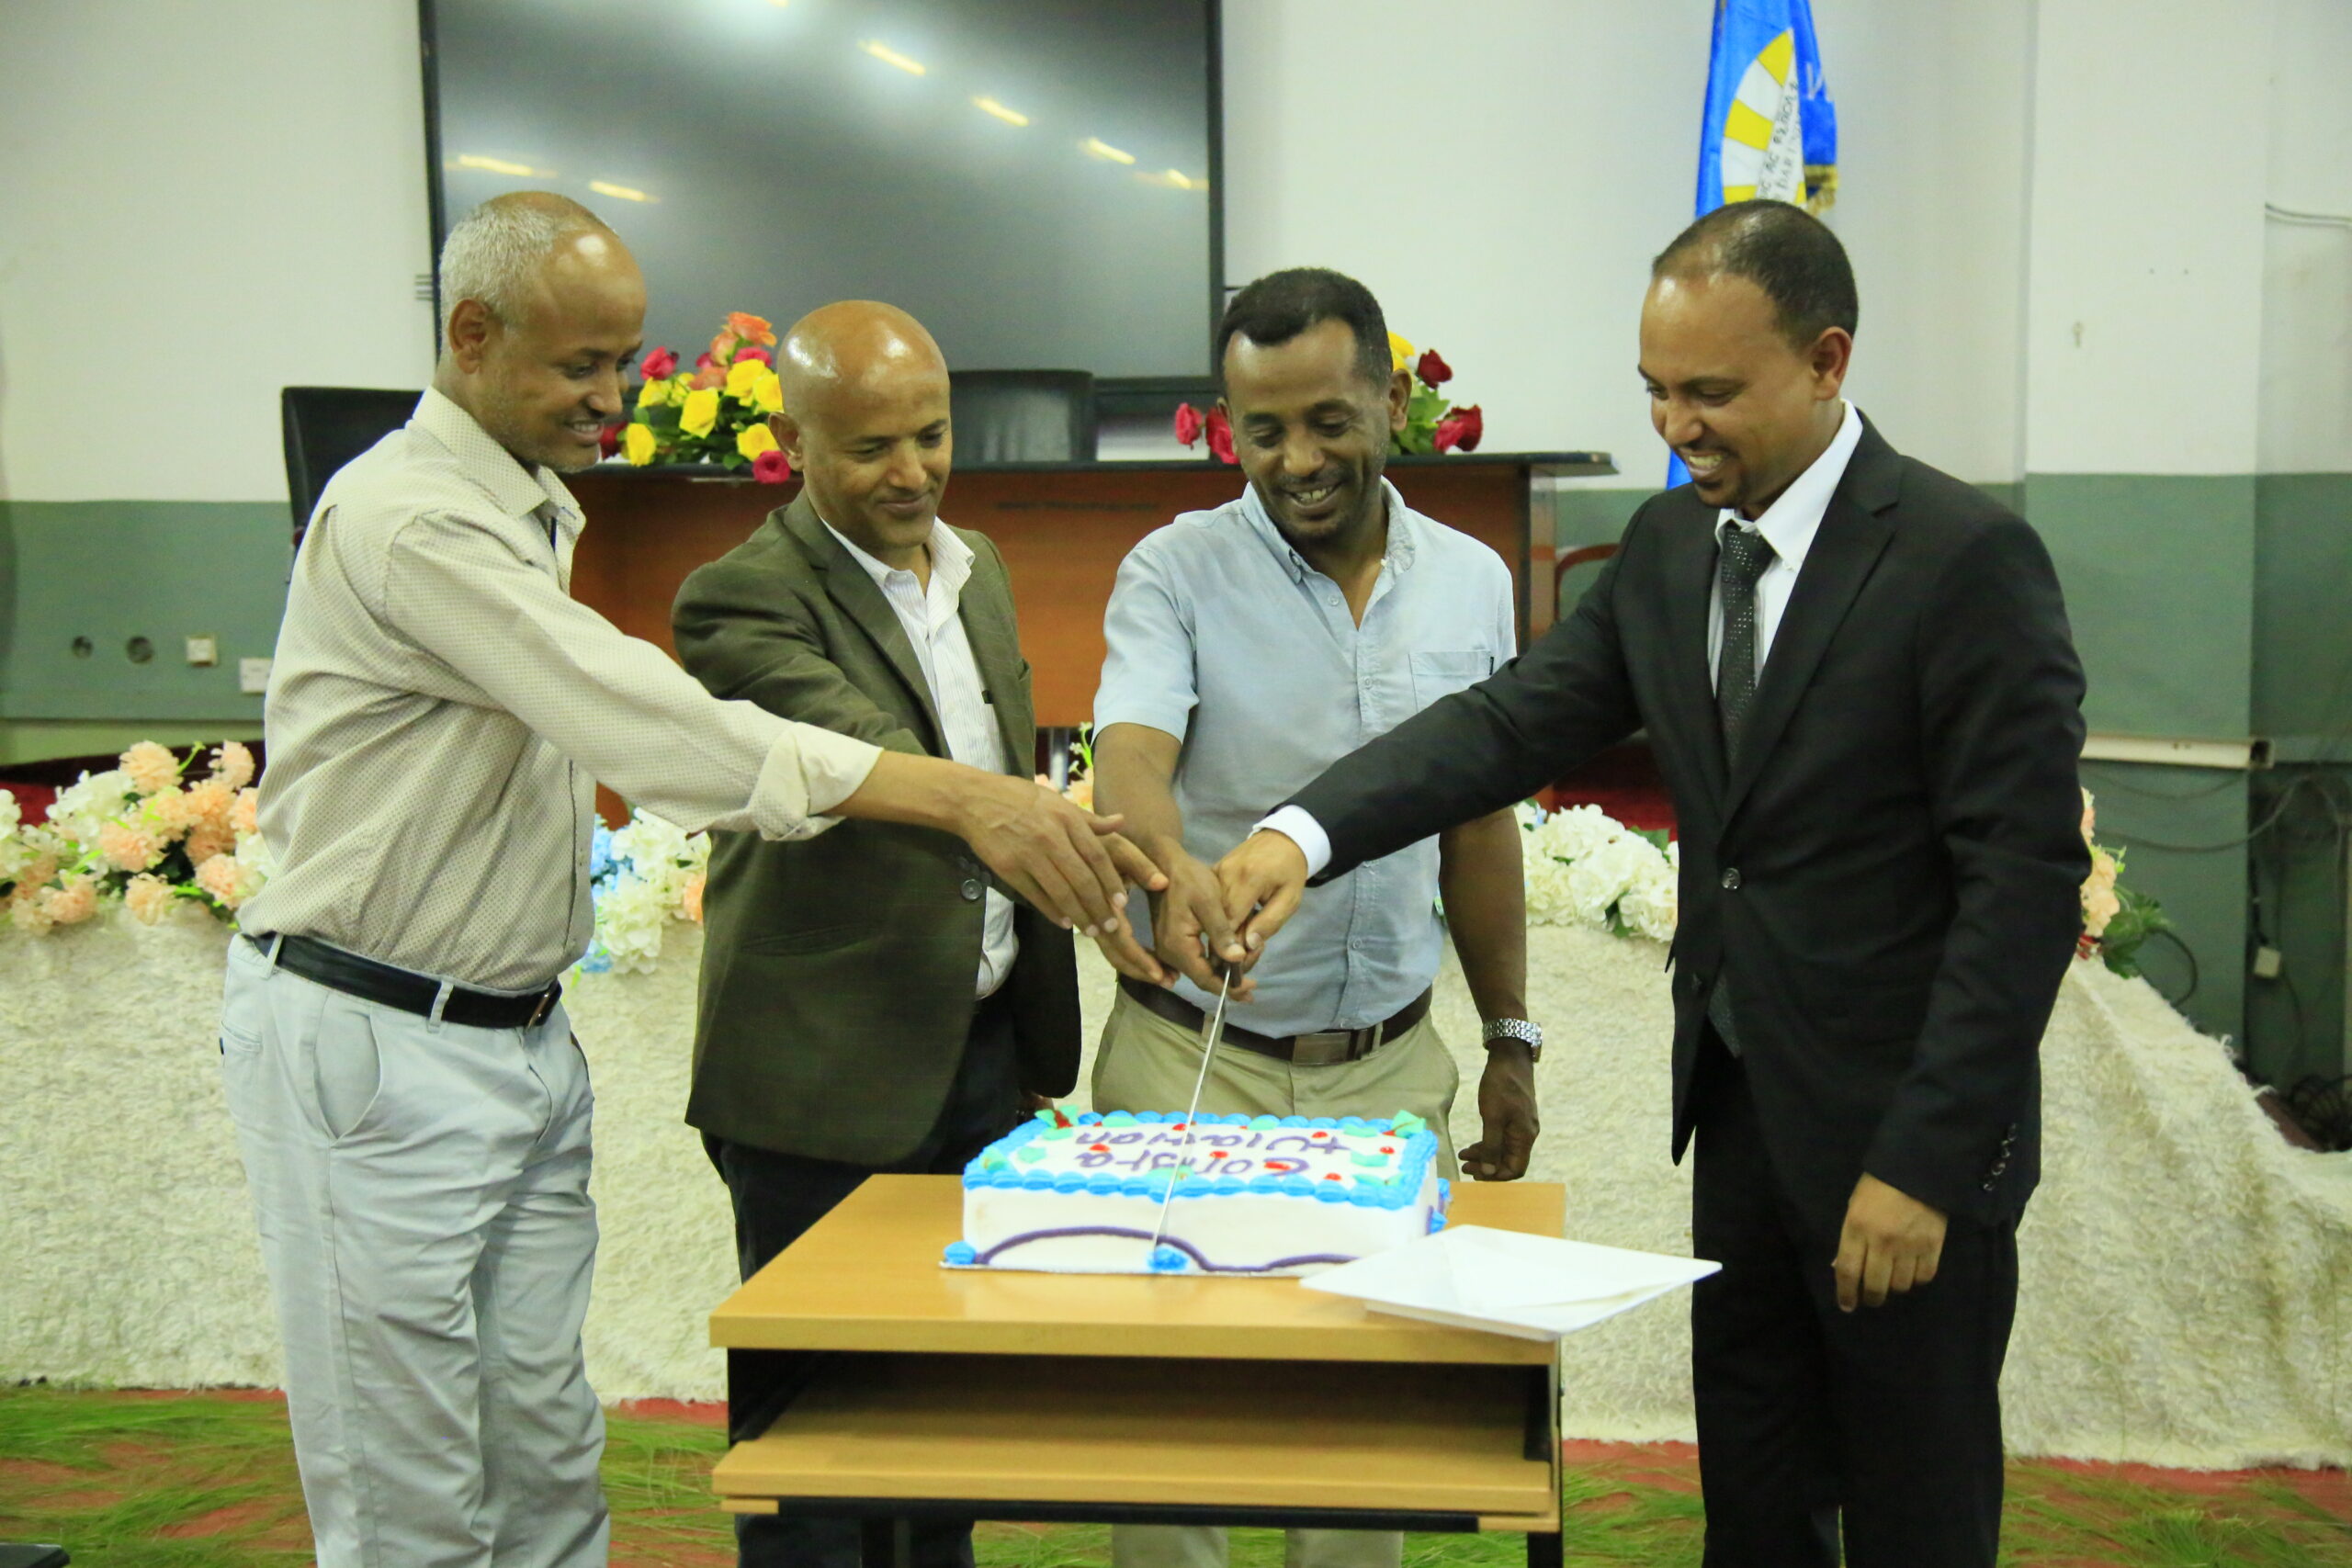 Bahir Dar Institute of Technology's project is now officially finalized!!